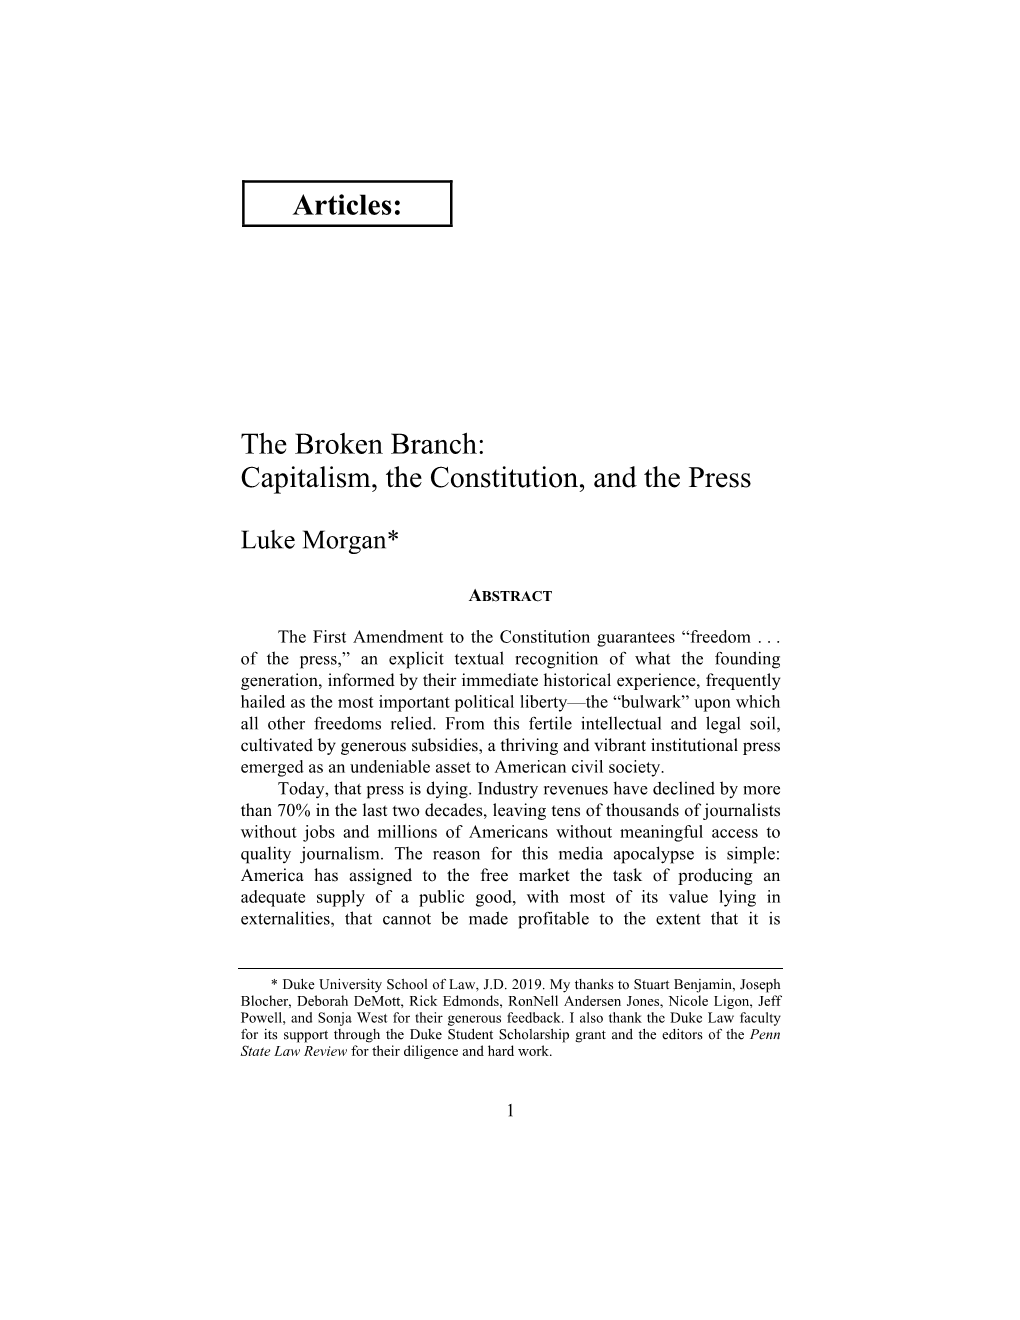 The Broken Branch: Capitalism, the Constitution, and the Press